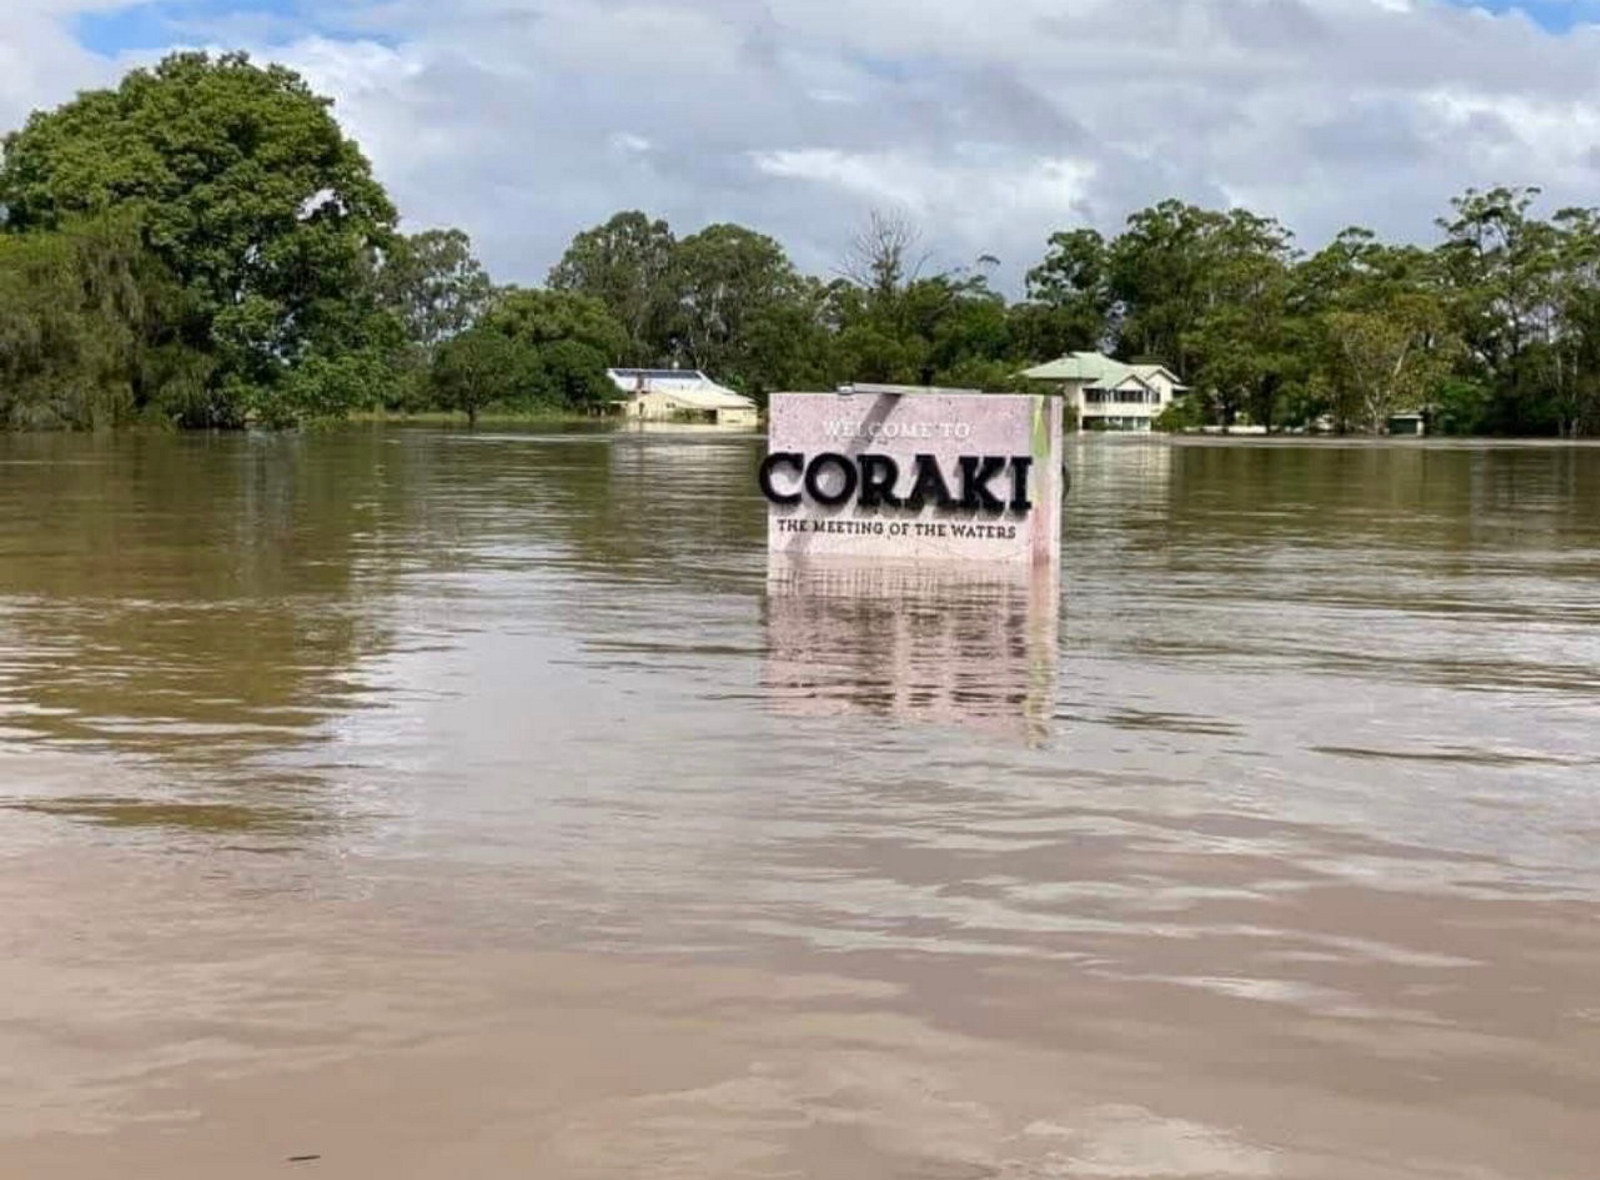 External damage caused by the NSW floods in 2022 in the Coraki area (submission 1002)